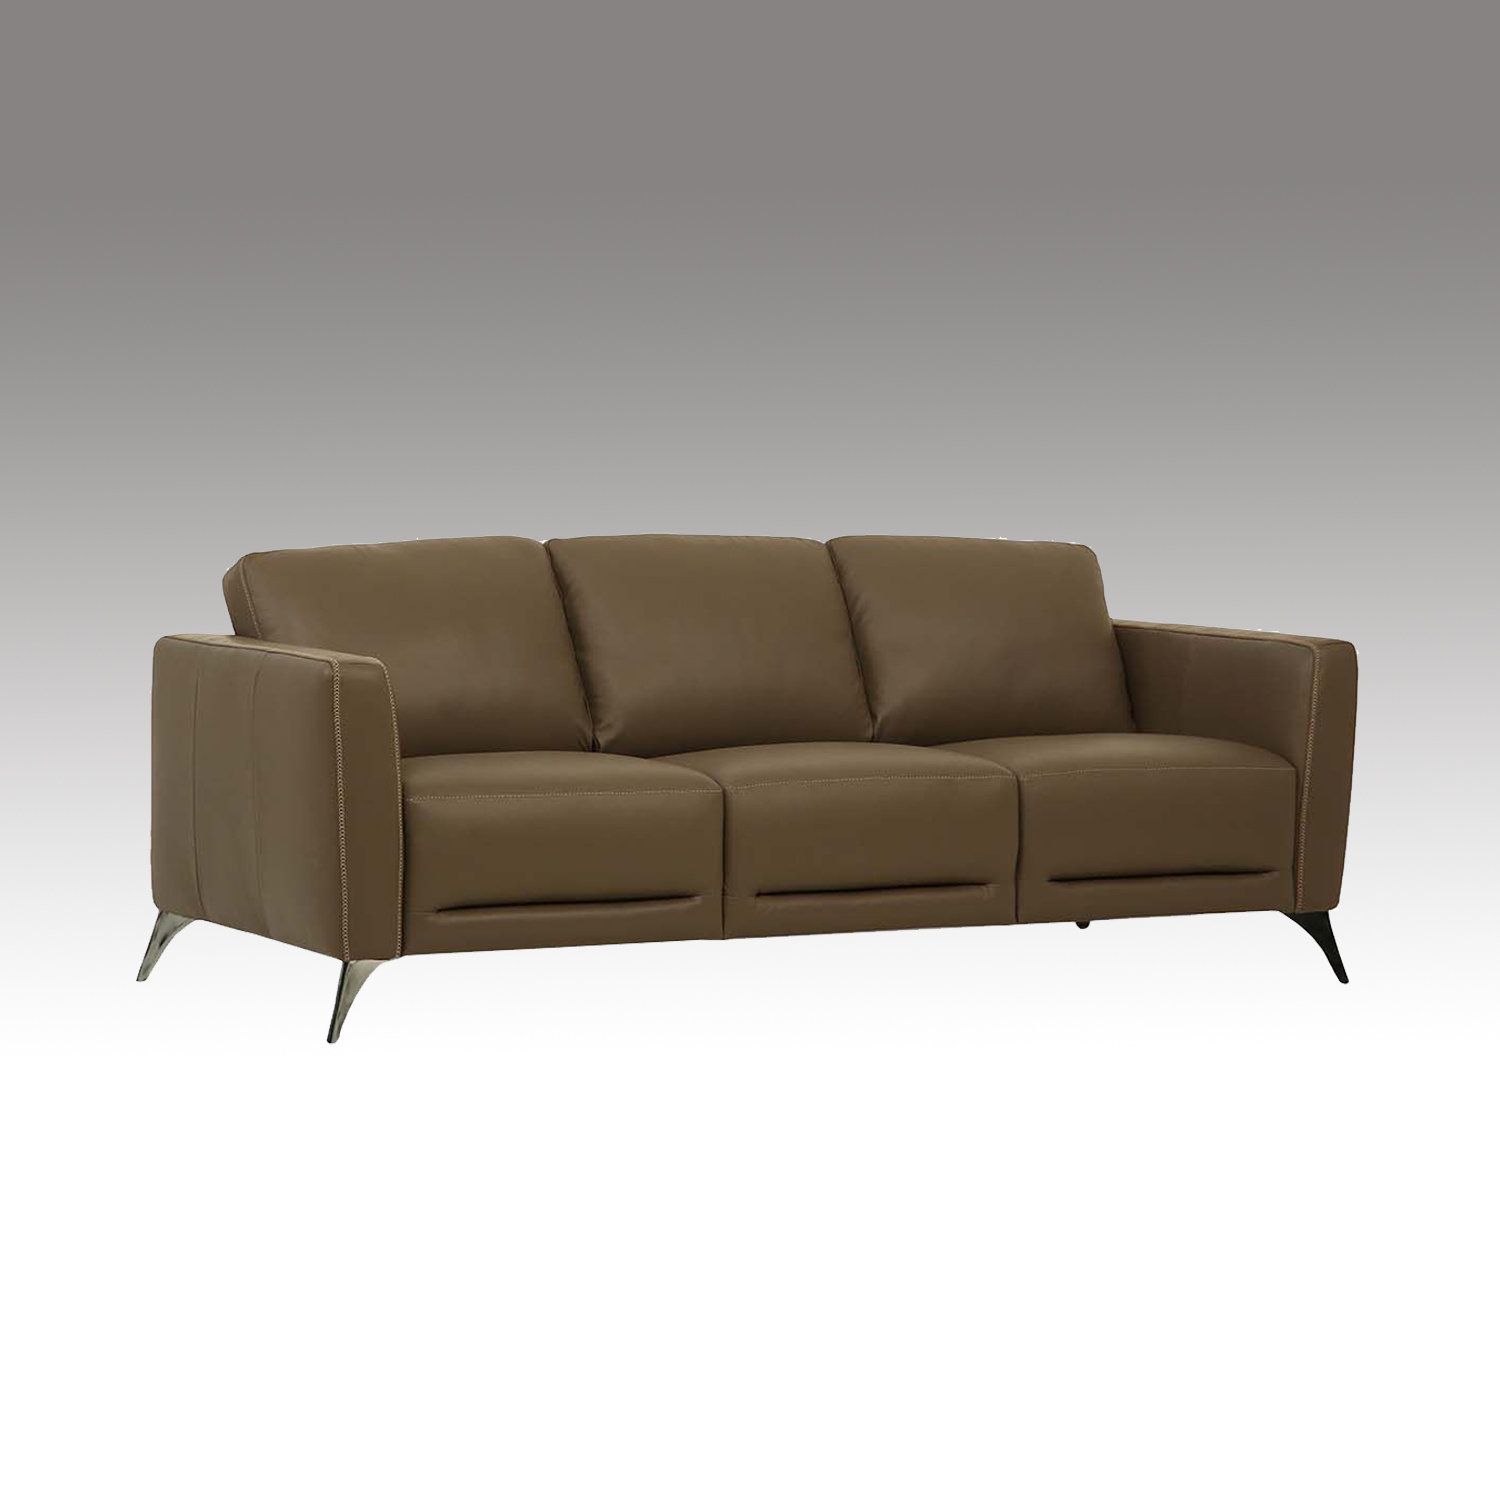 Corrigan Studio® Leather Upholstered Sofa With Metal Legs In Chrome And  Taupe | Wayfair For Chrome Metal Legs Sofas (View 19 of 20)